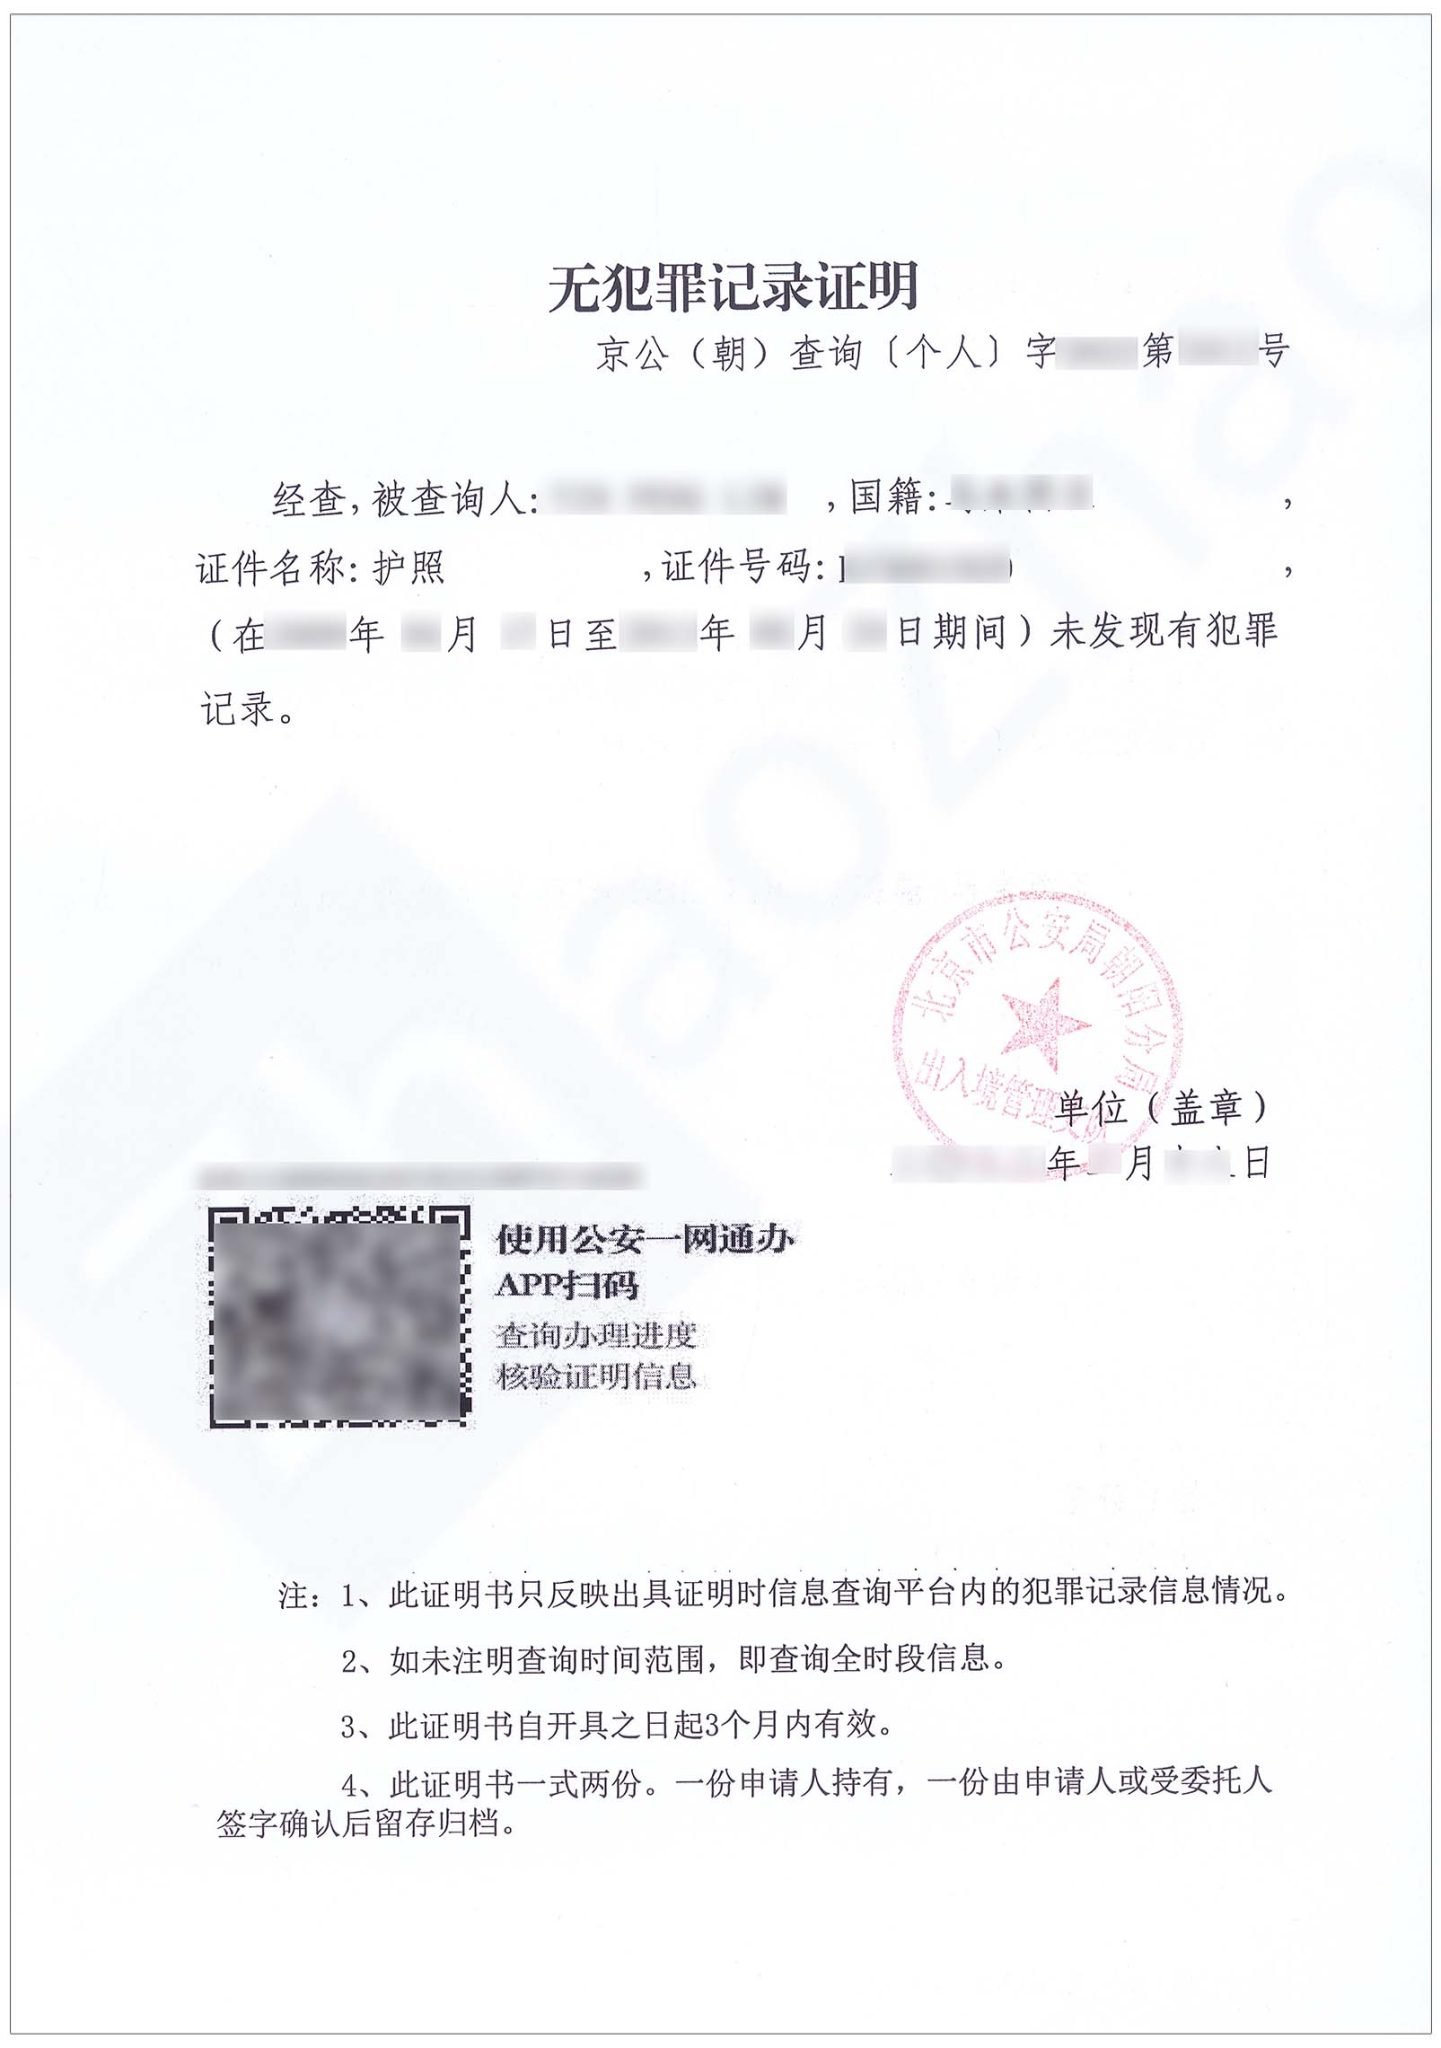 What a China Police Certificate Looks Like ZhaoZhao